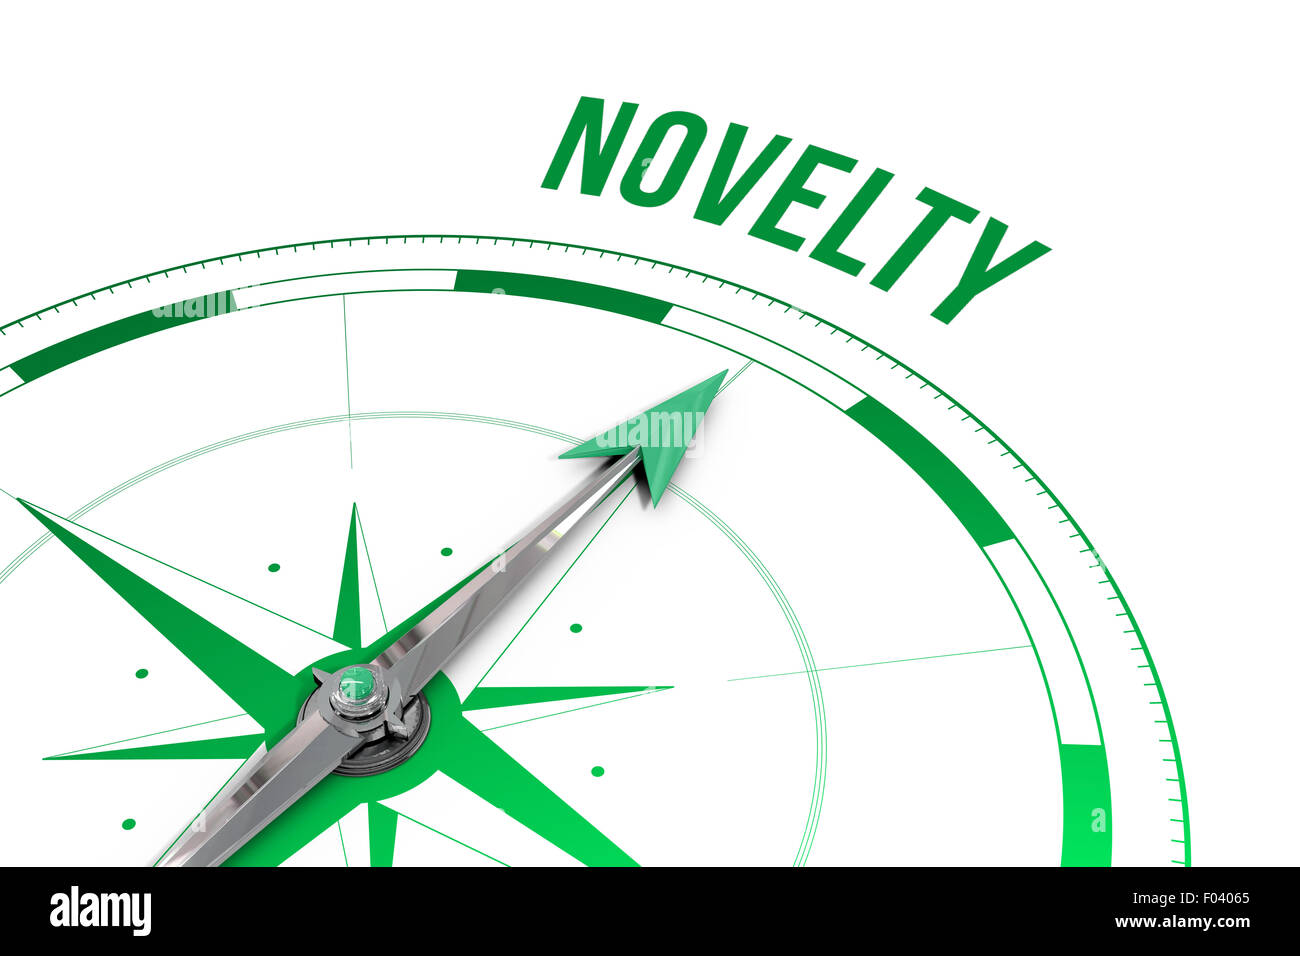 Novelty  against compass Stock Photo